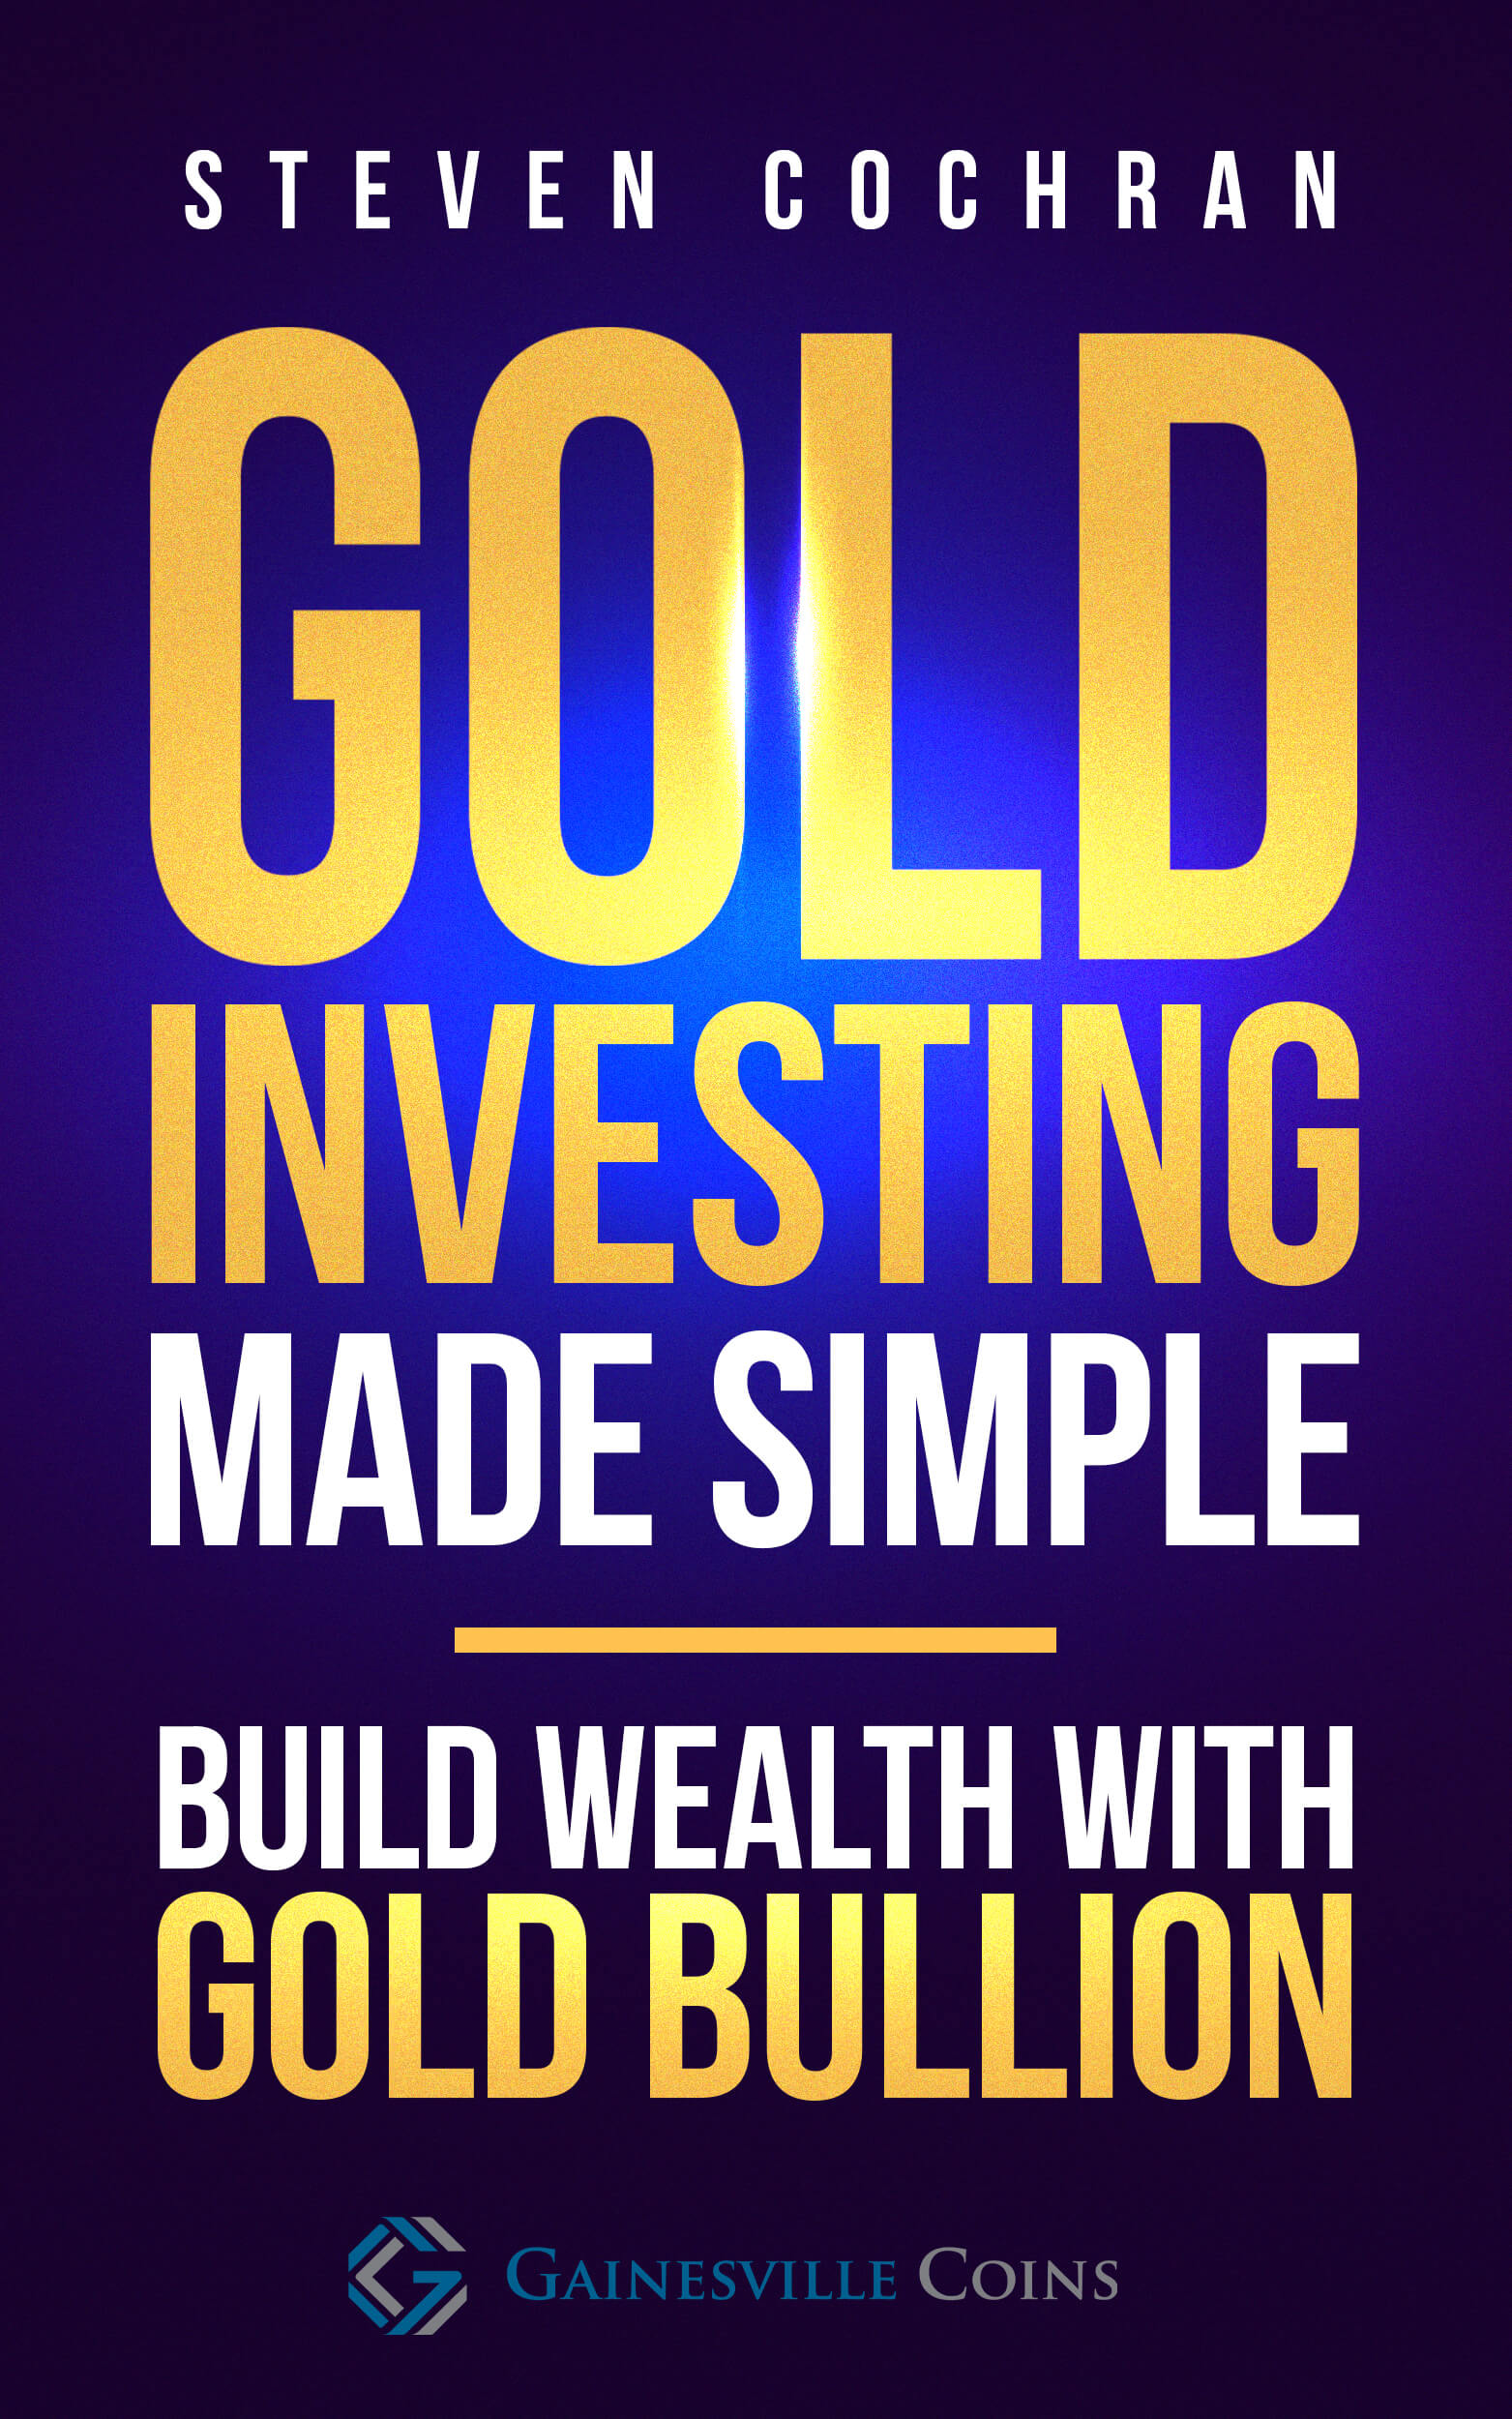 Gainesville Coins' New Gold Investing eBook Is Available